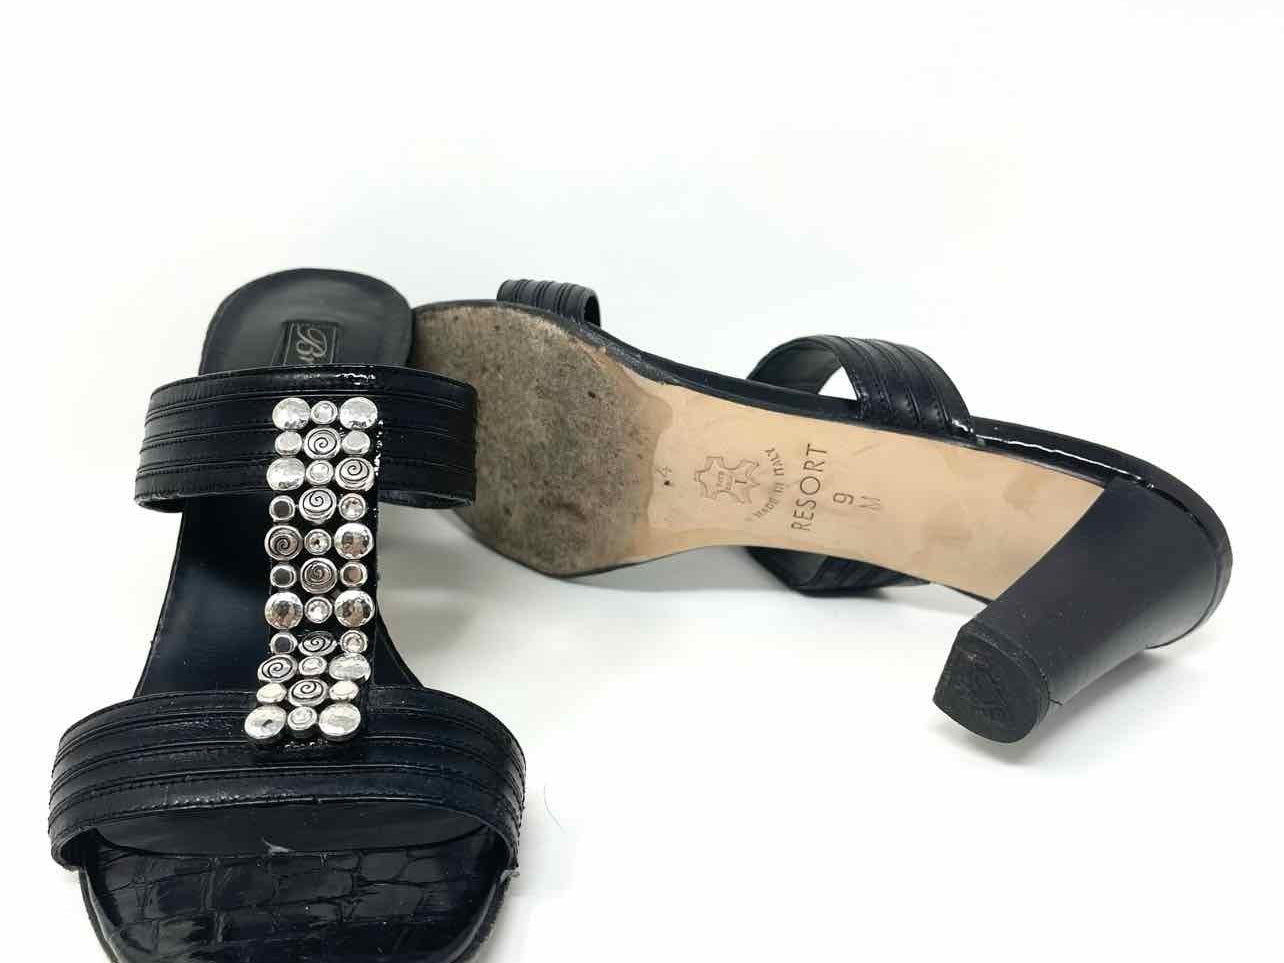 Brighton Women's Black/Silver Slide Leather Embellished Size 9 Sandals - Article Consignment